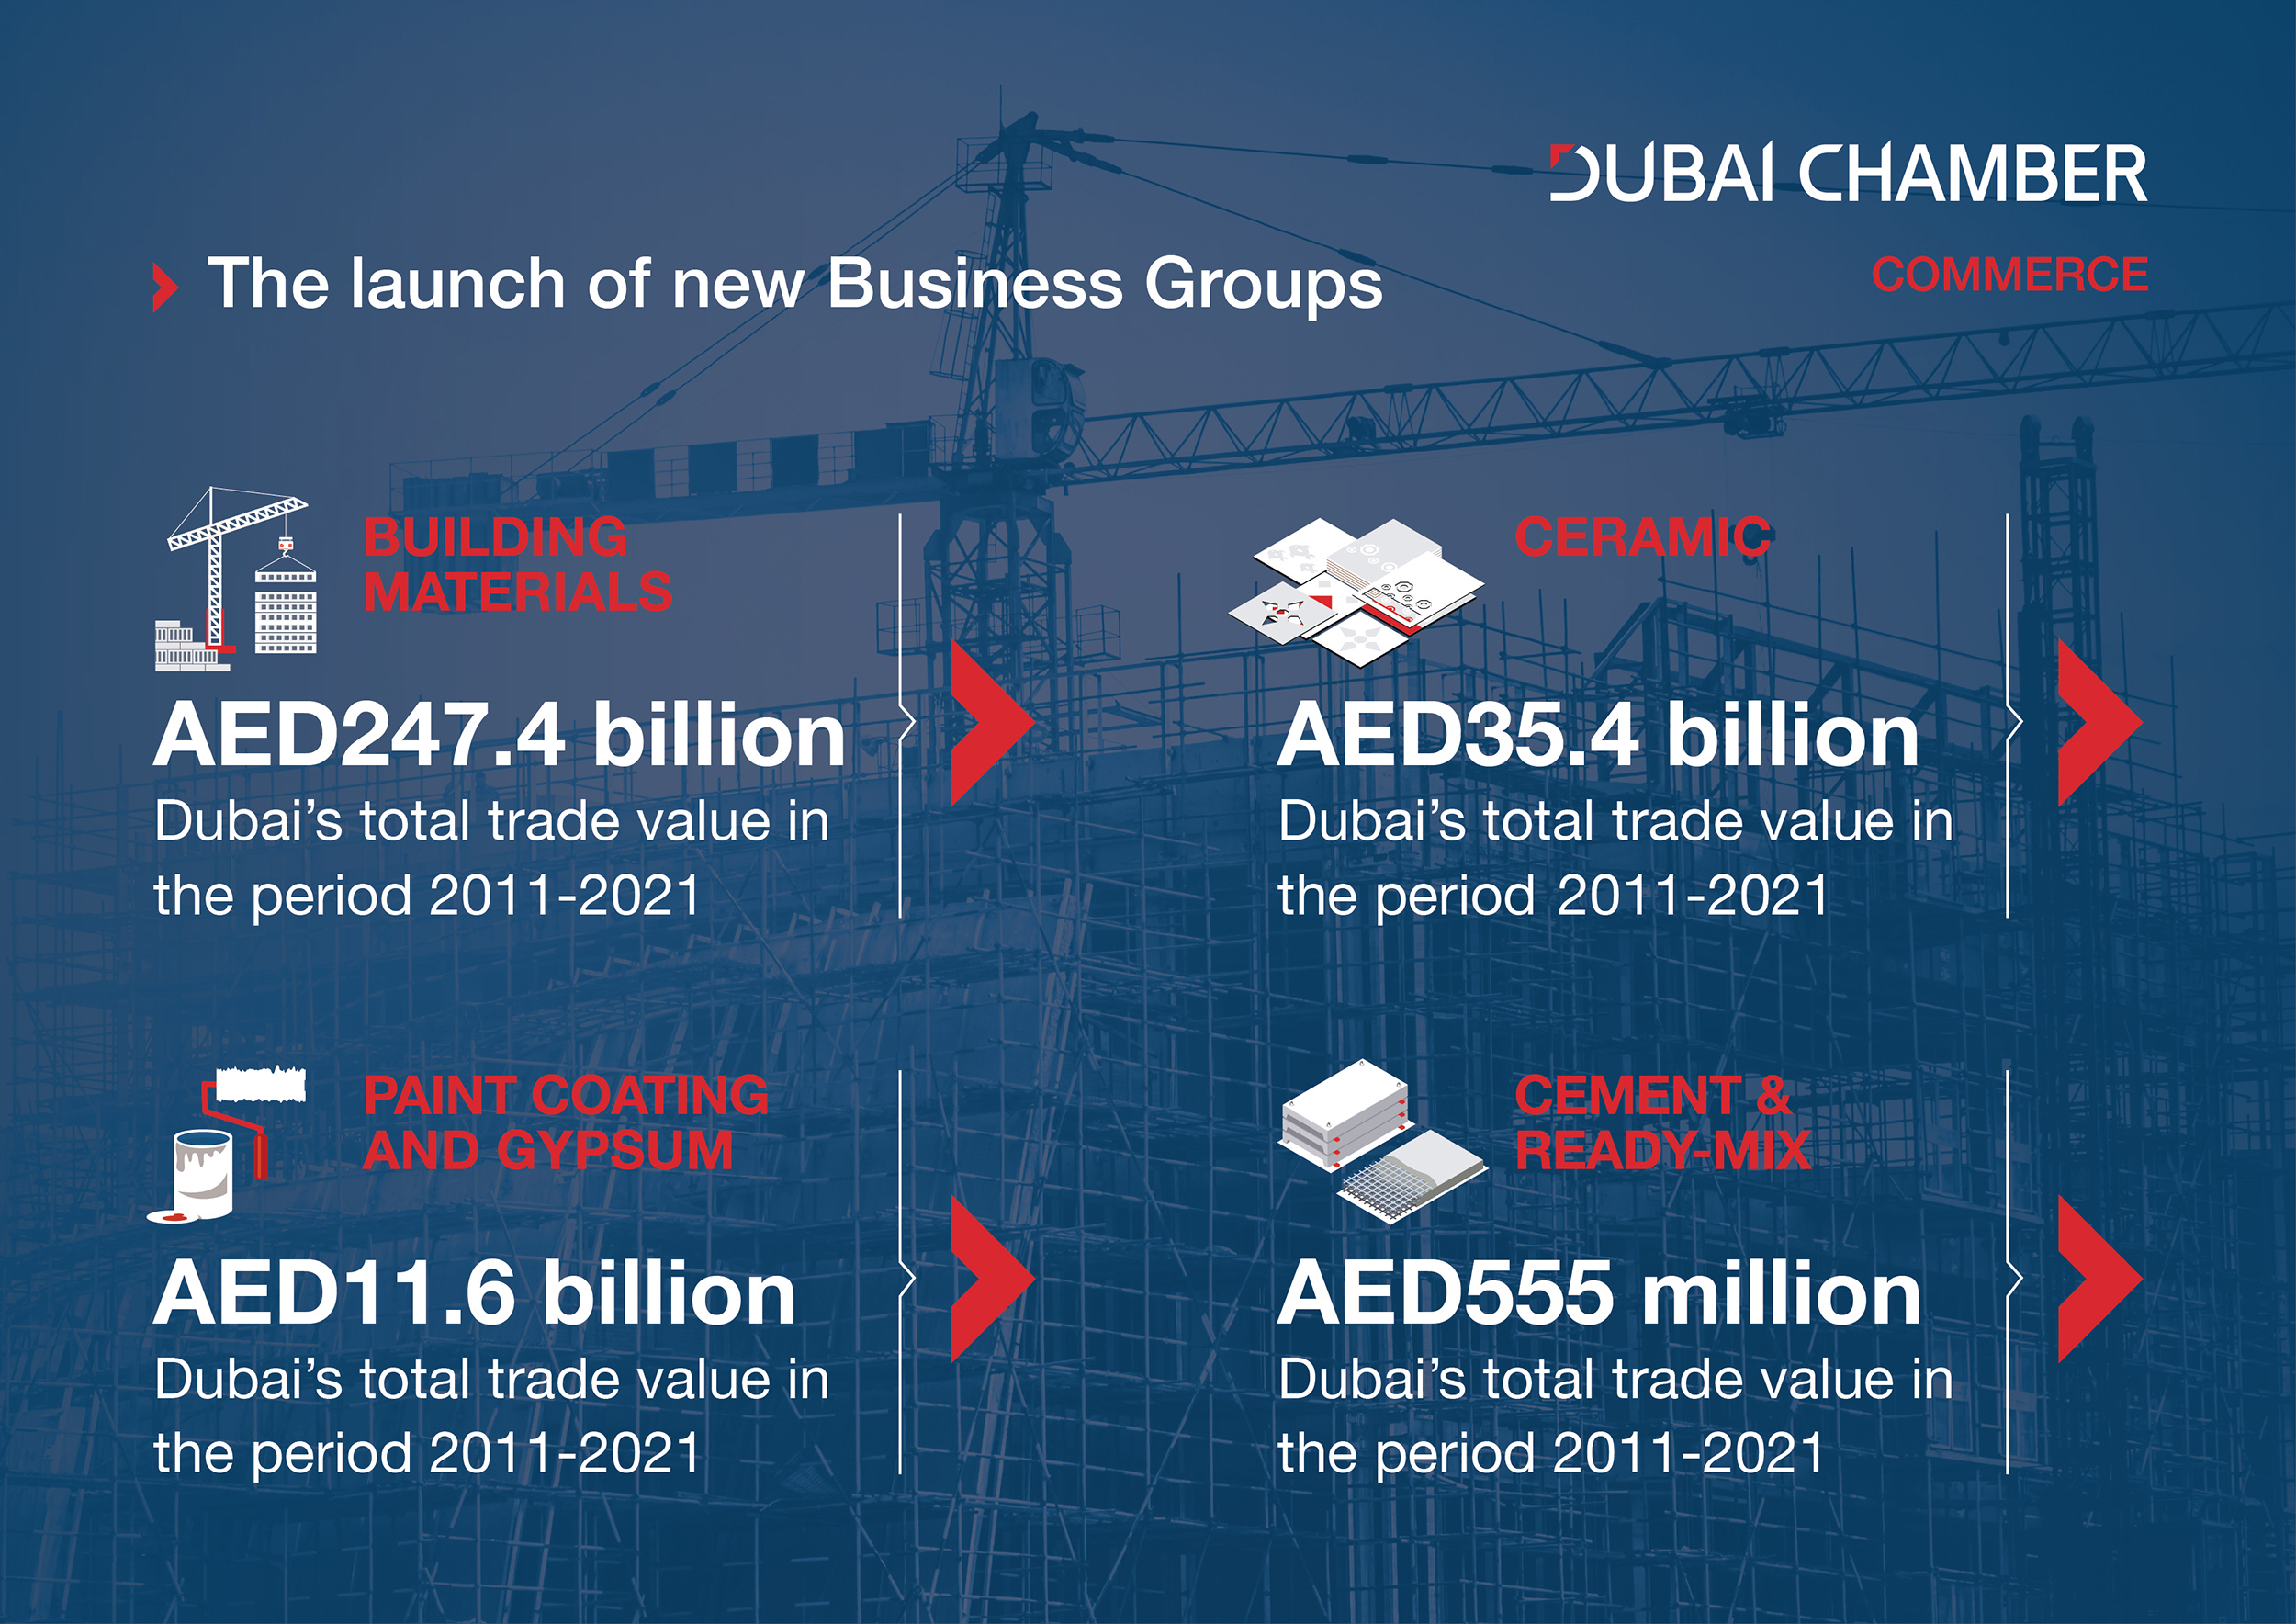 Dubai Chamber of Commerce launches four business groups within the construction sector